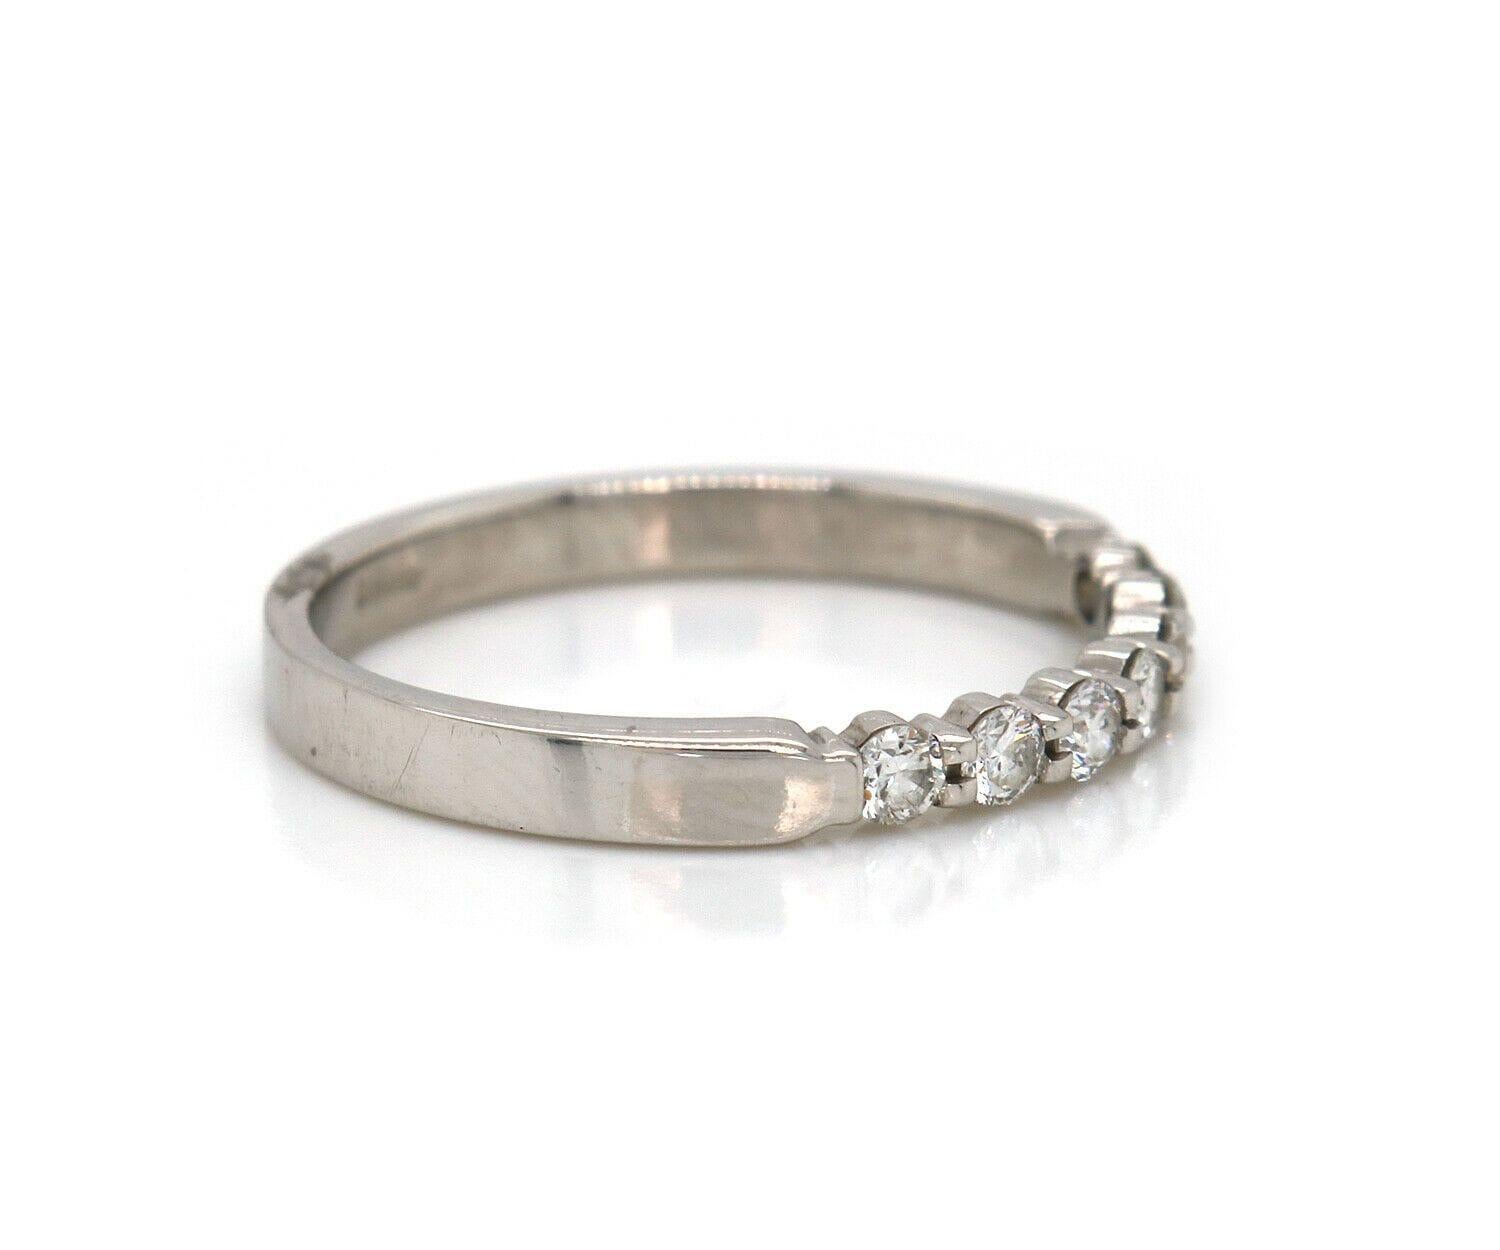 0.21ctw Diamond Shared Prong Wedding Band Ring in Platinum

Diamond Shared Prong Wedding Band Ring
.950 Platinum
Diamonds Carat Weight: Approx. 0.21ctw
Clarity: VS
Color: G
Band Width: Approx. 2.5 MM
Ring Size: 7.0 (US)
Weight: Approx. 3.44